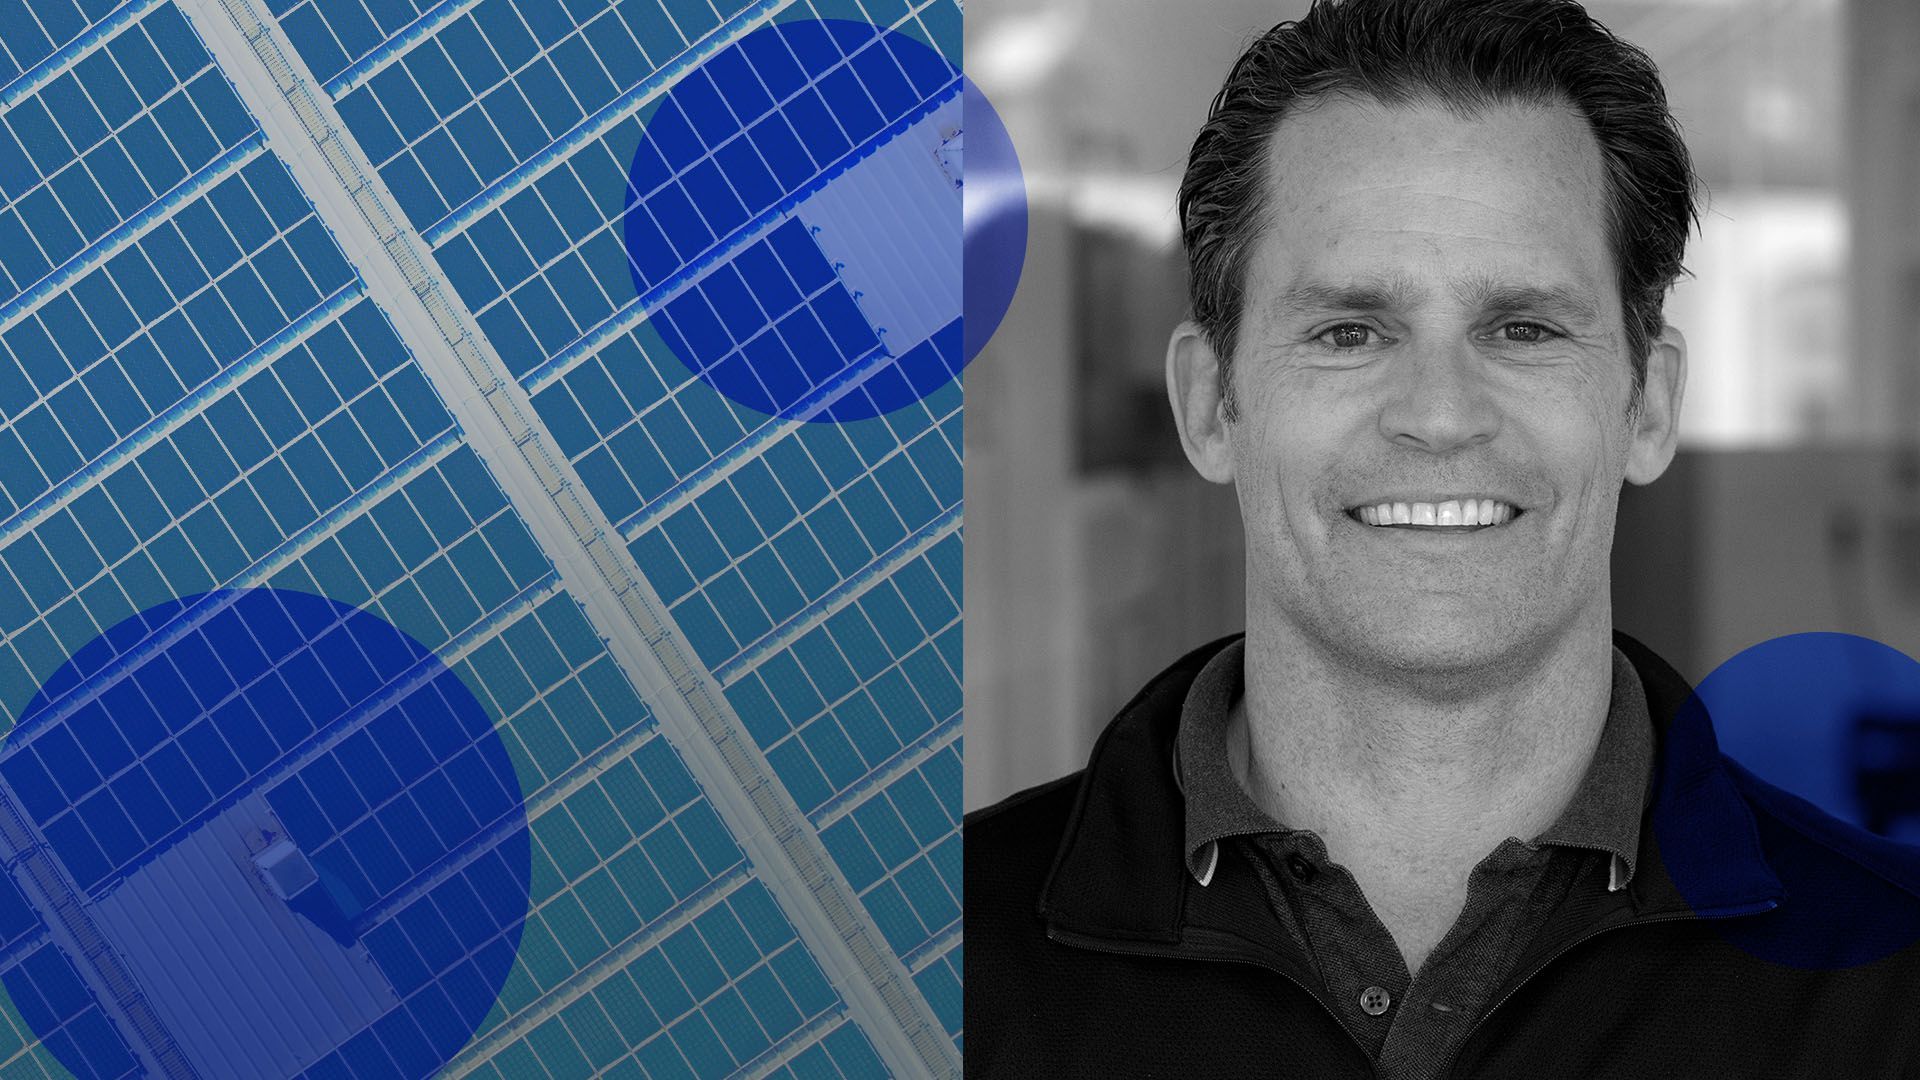 photo illustration of ZOLA CEO Bill Lenihan next to a solar panel and surrounded by blue circles 